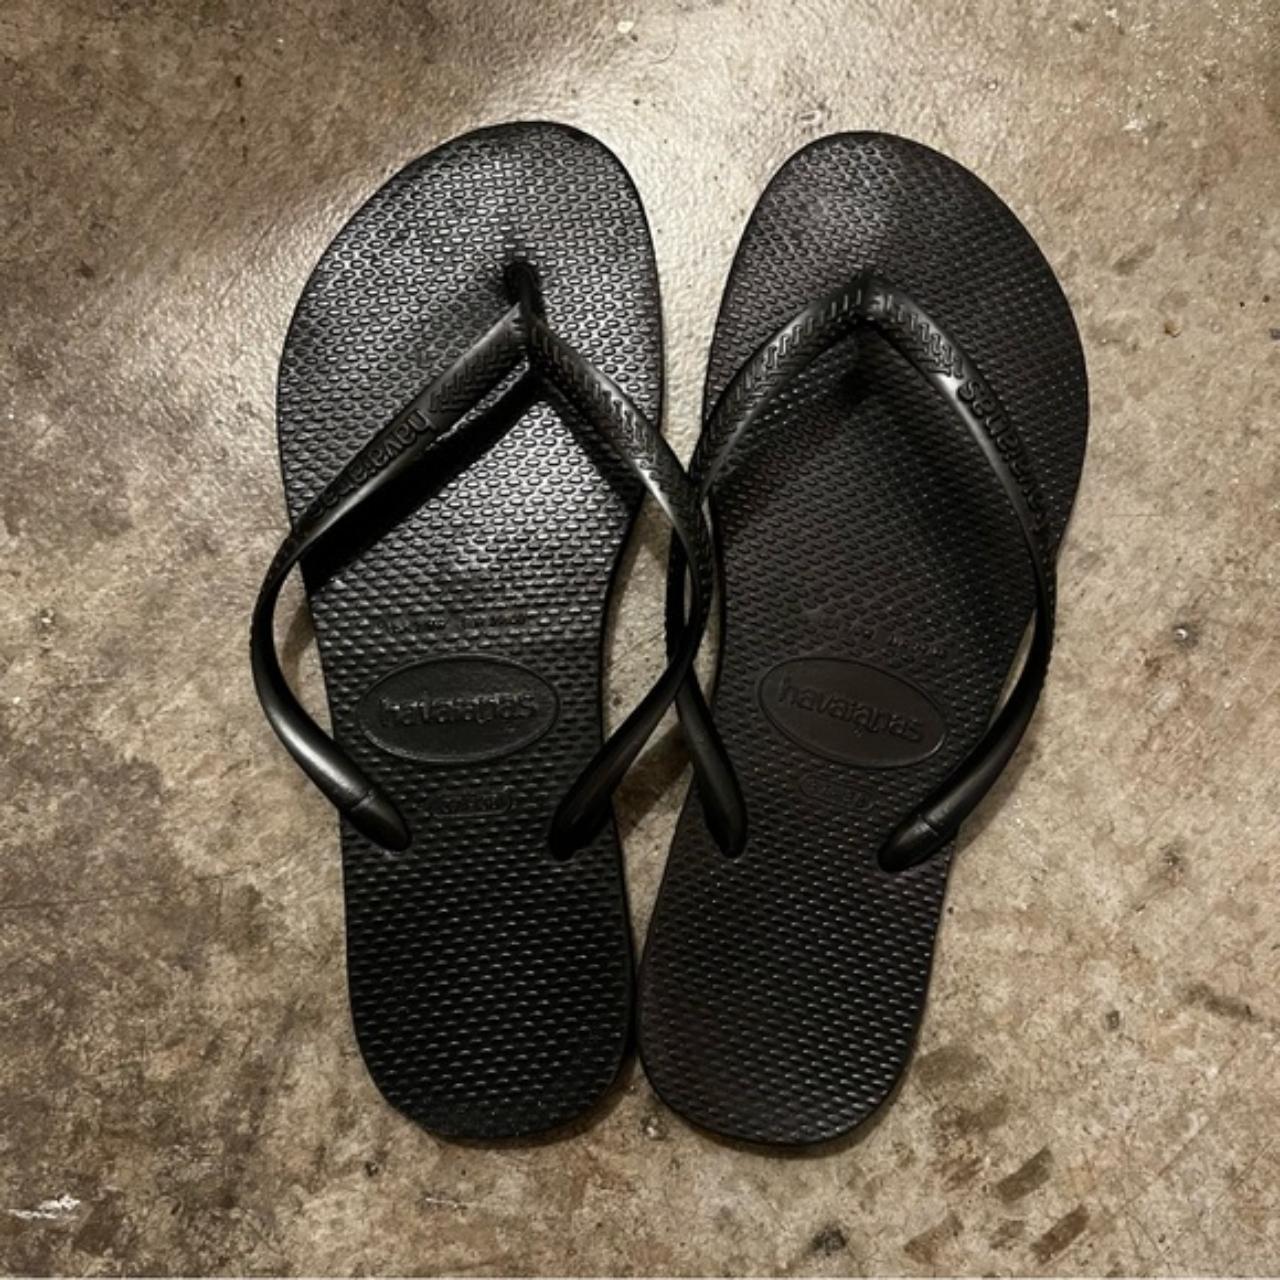 Havaianas black rubber flip flops These are the... - Depop